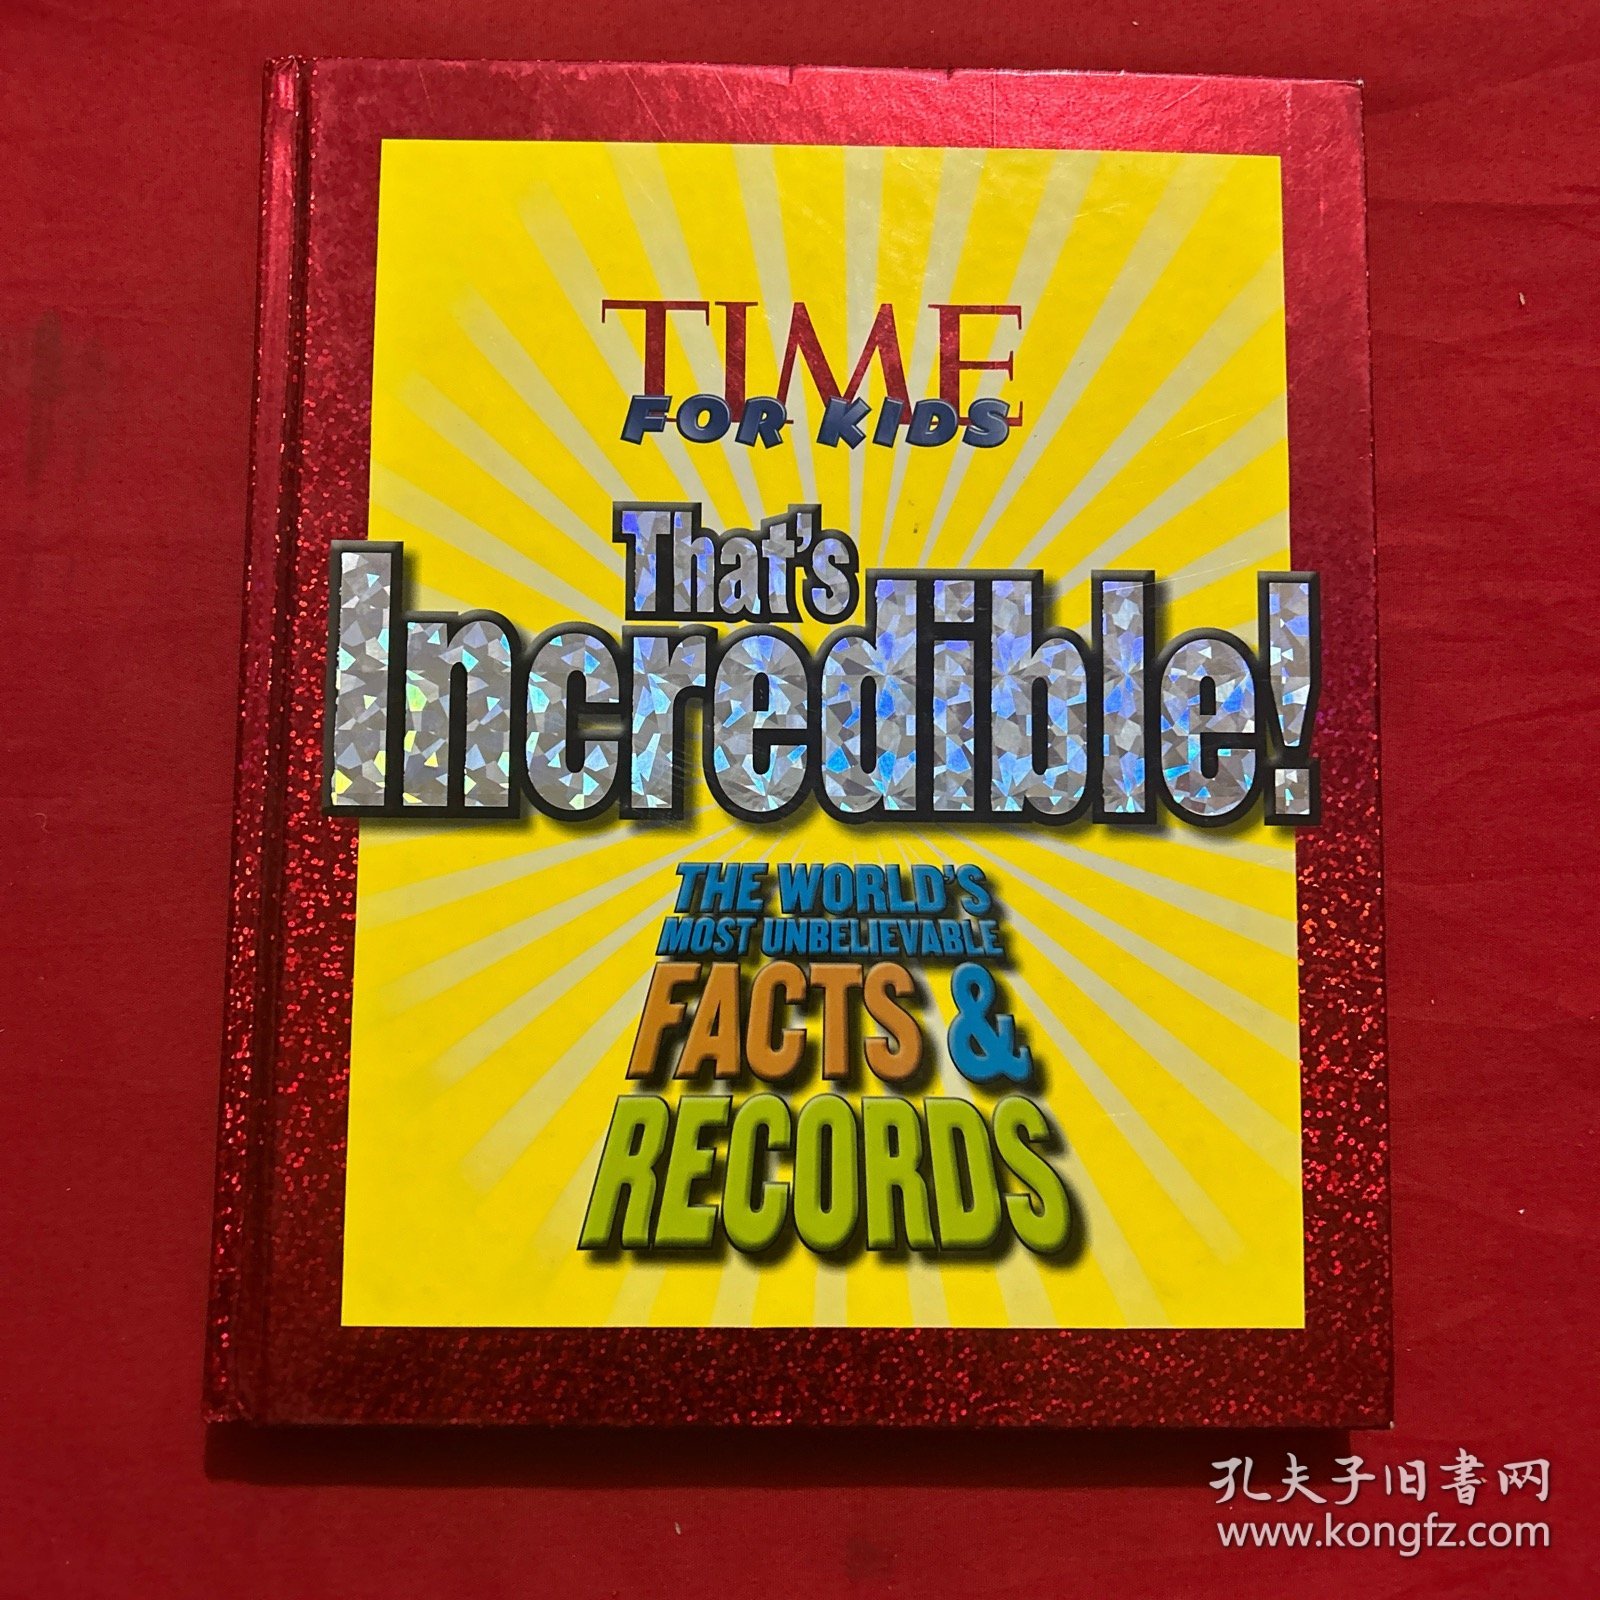 TIME For Kids That's Incredible!: The World's Most Unbelievable Facts and Records! [Hardcover] 《时代周刊》儿童读物：不可思议的世界之最（精装）